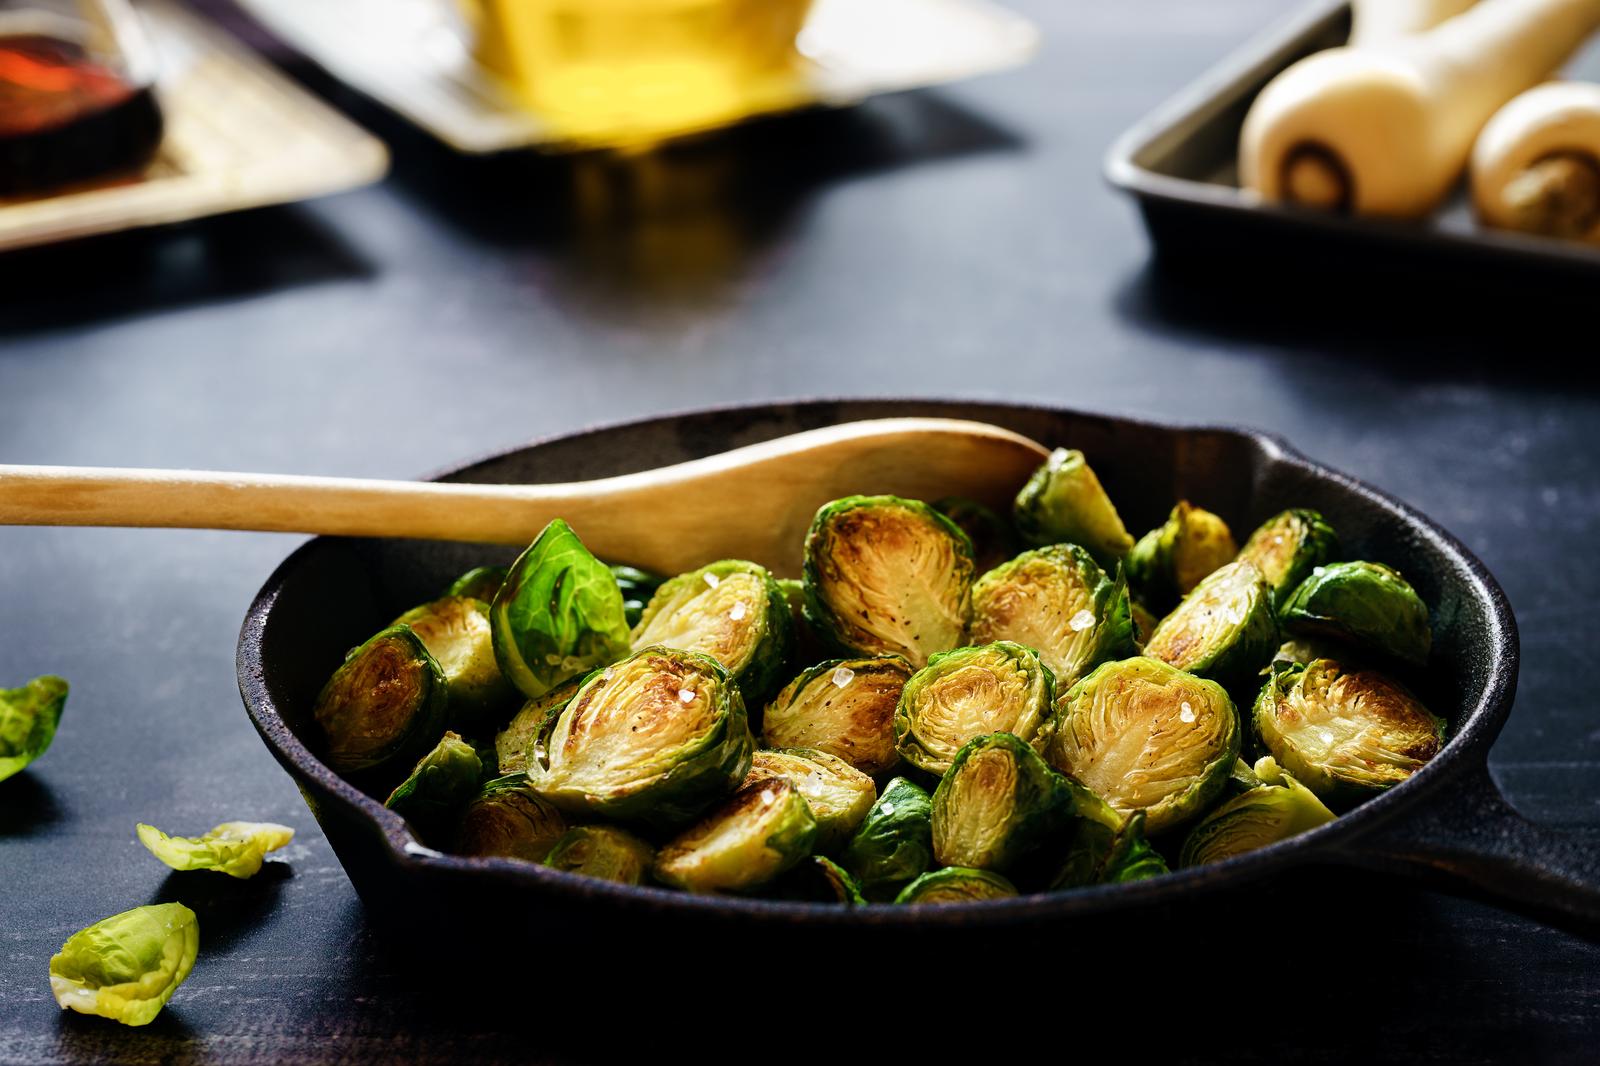 Can We Actually Guess Your Age Just by the Grown-Up Choices You Make? Brussels sprouts